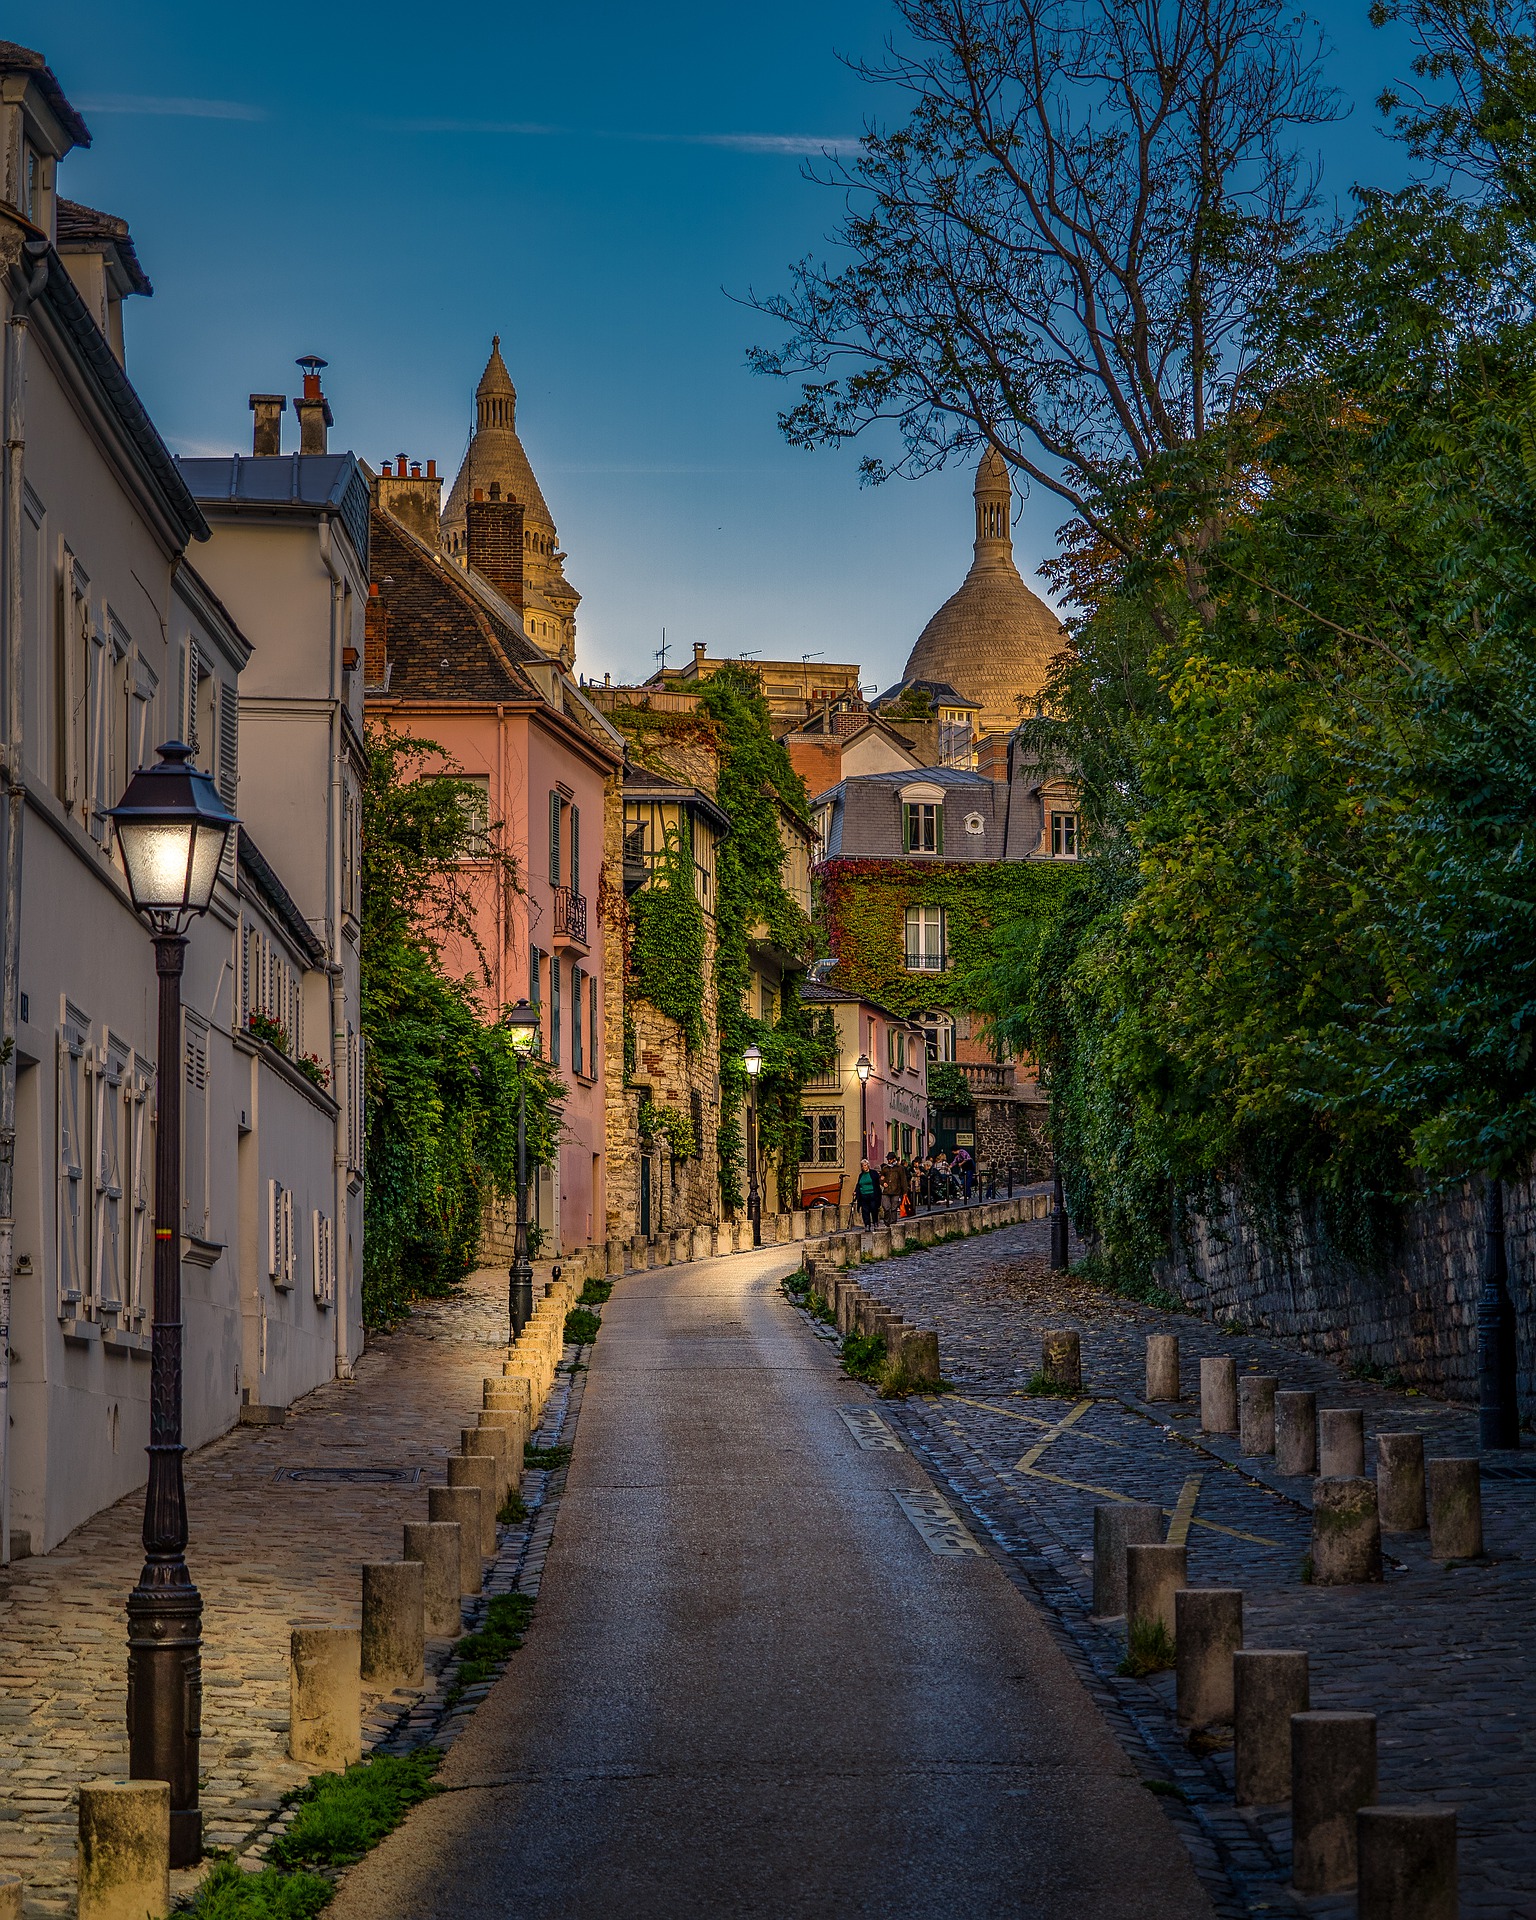 Stroll the hills of Montmartre